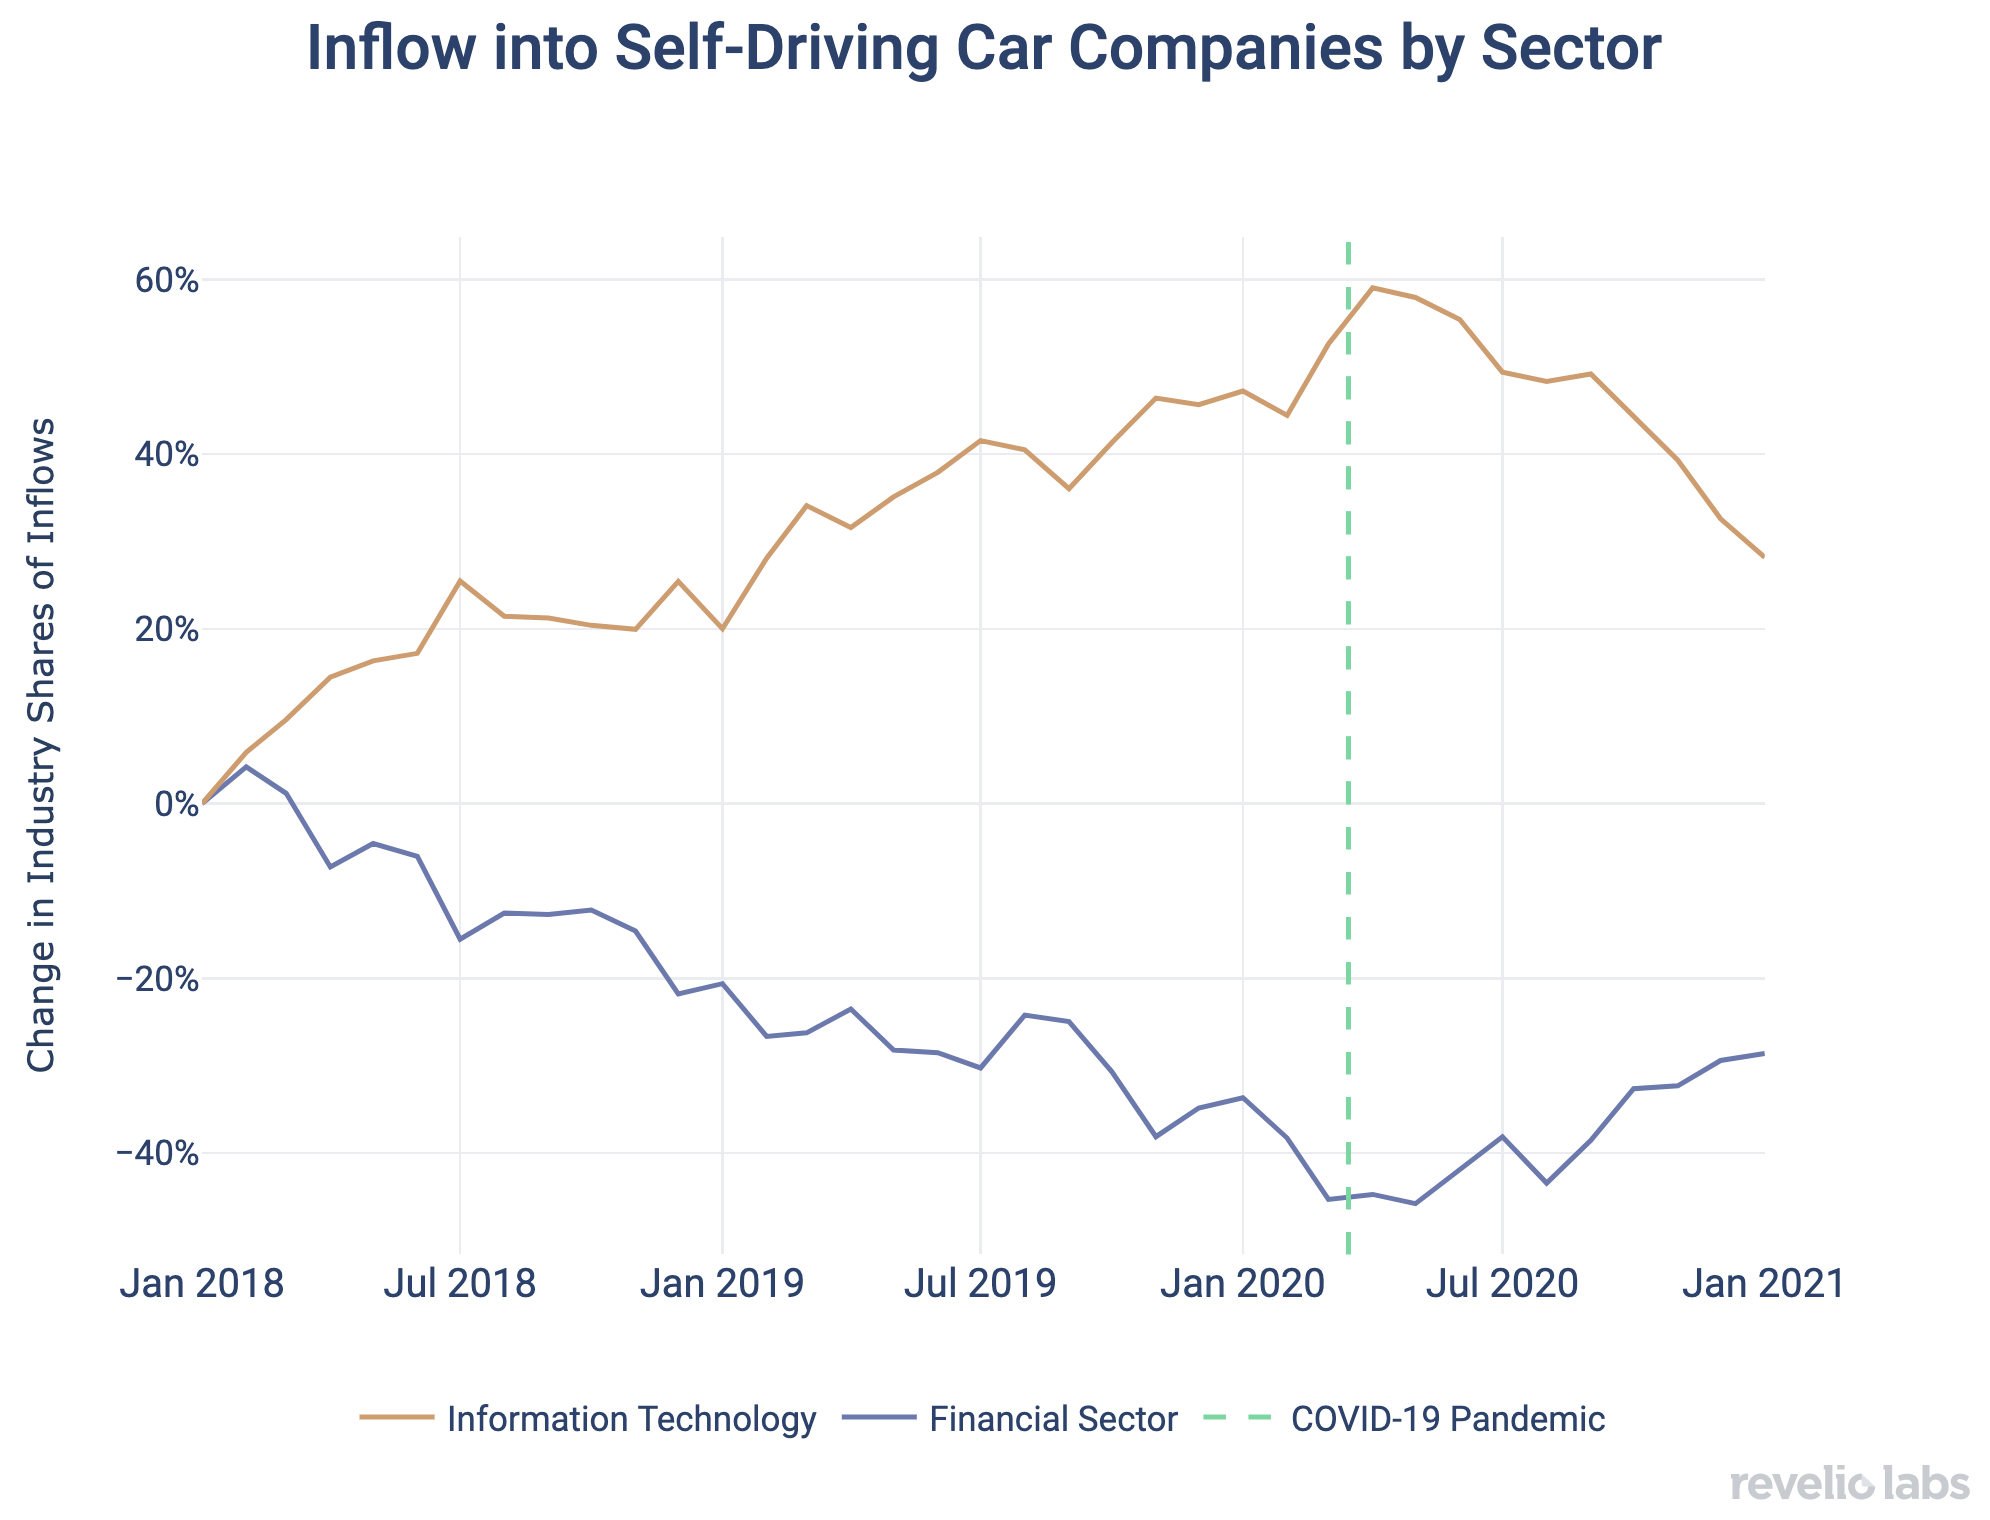 Inflow into Self-Driving Car Companies by Sector